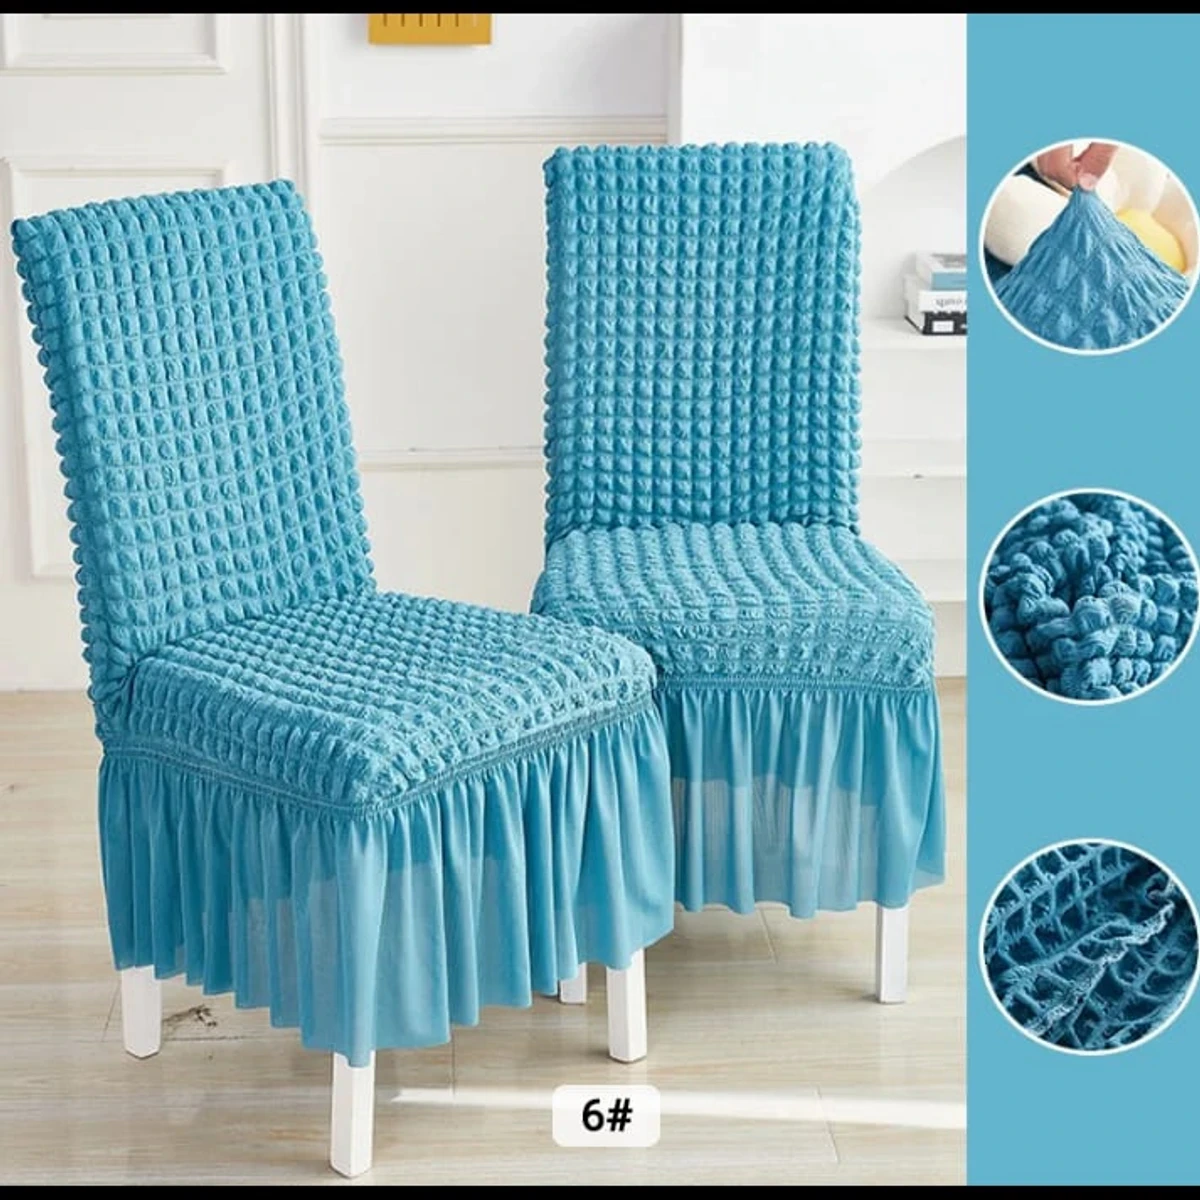 Chair Covers for Dining Room Seat (sky blue colour)